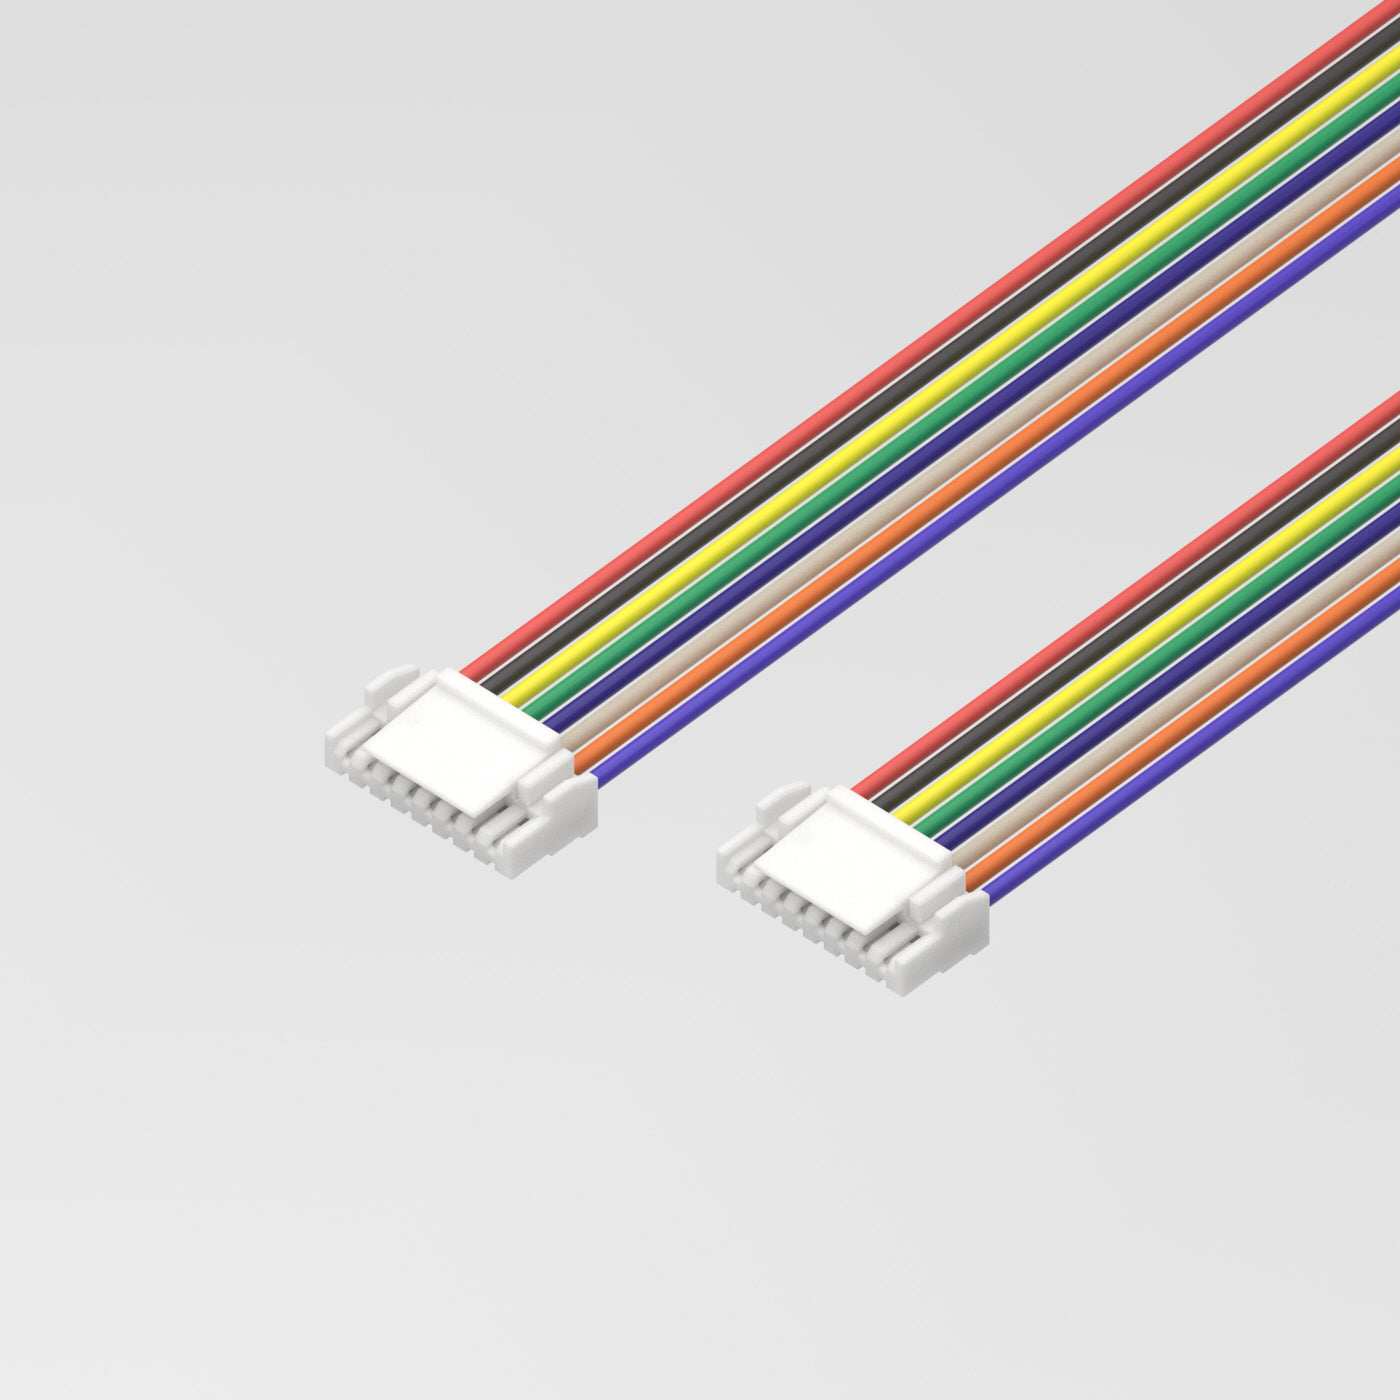 JST-GH 8 pin cable